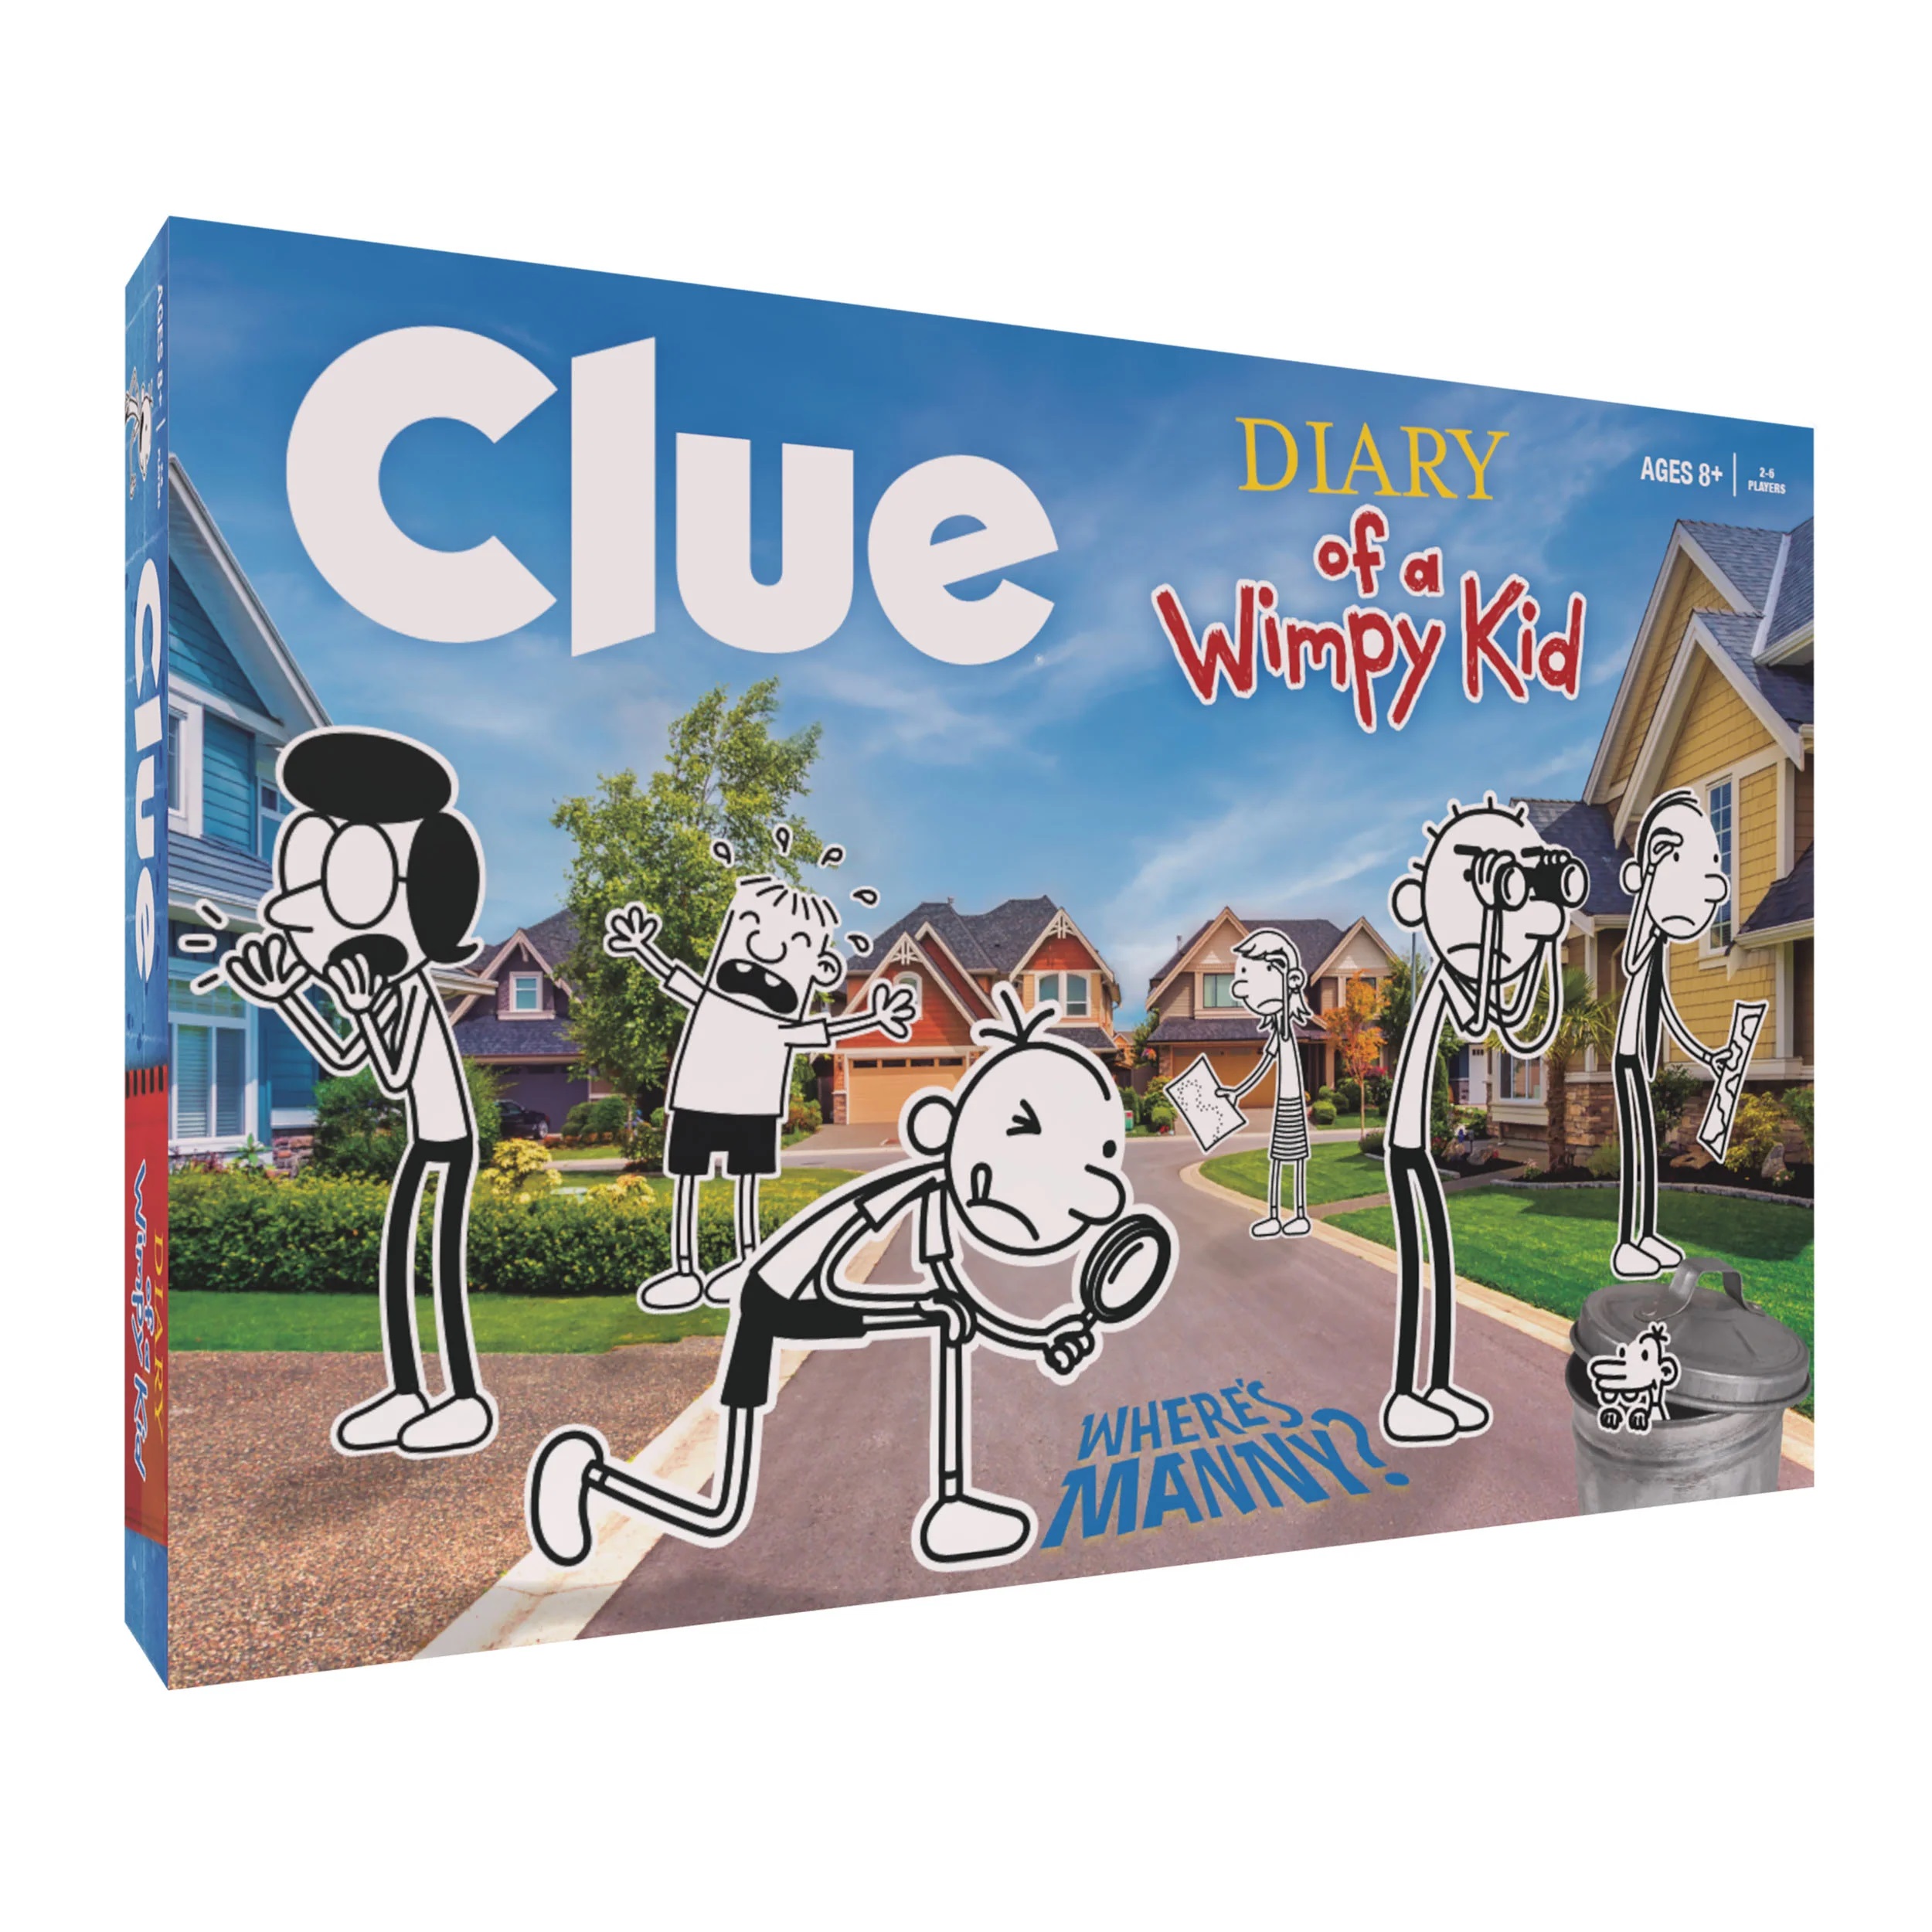 Clue Diary of A Wimpy Kid